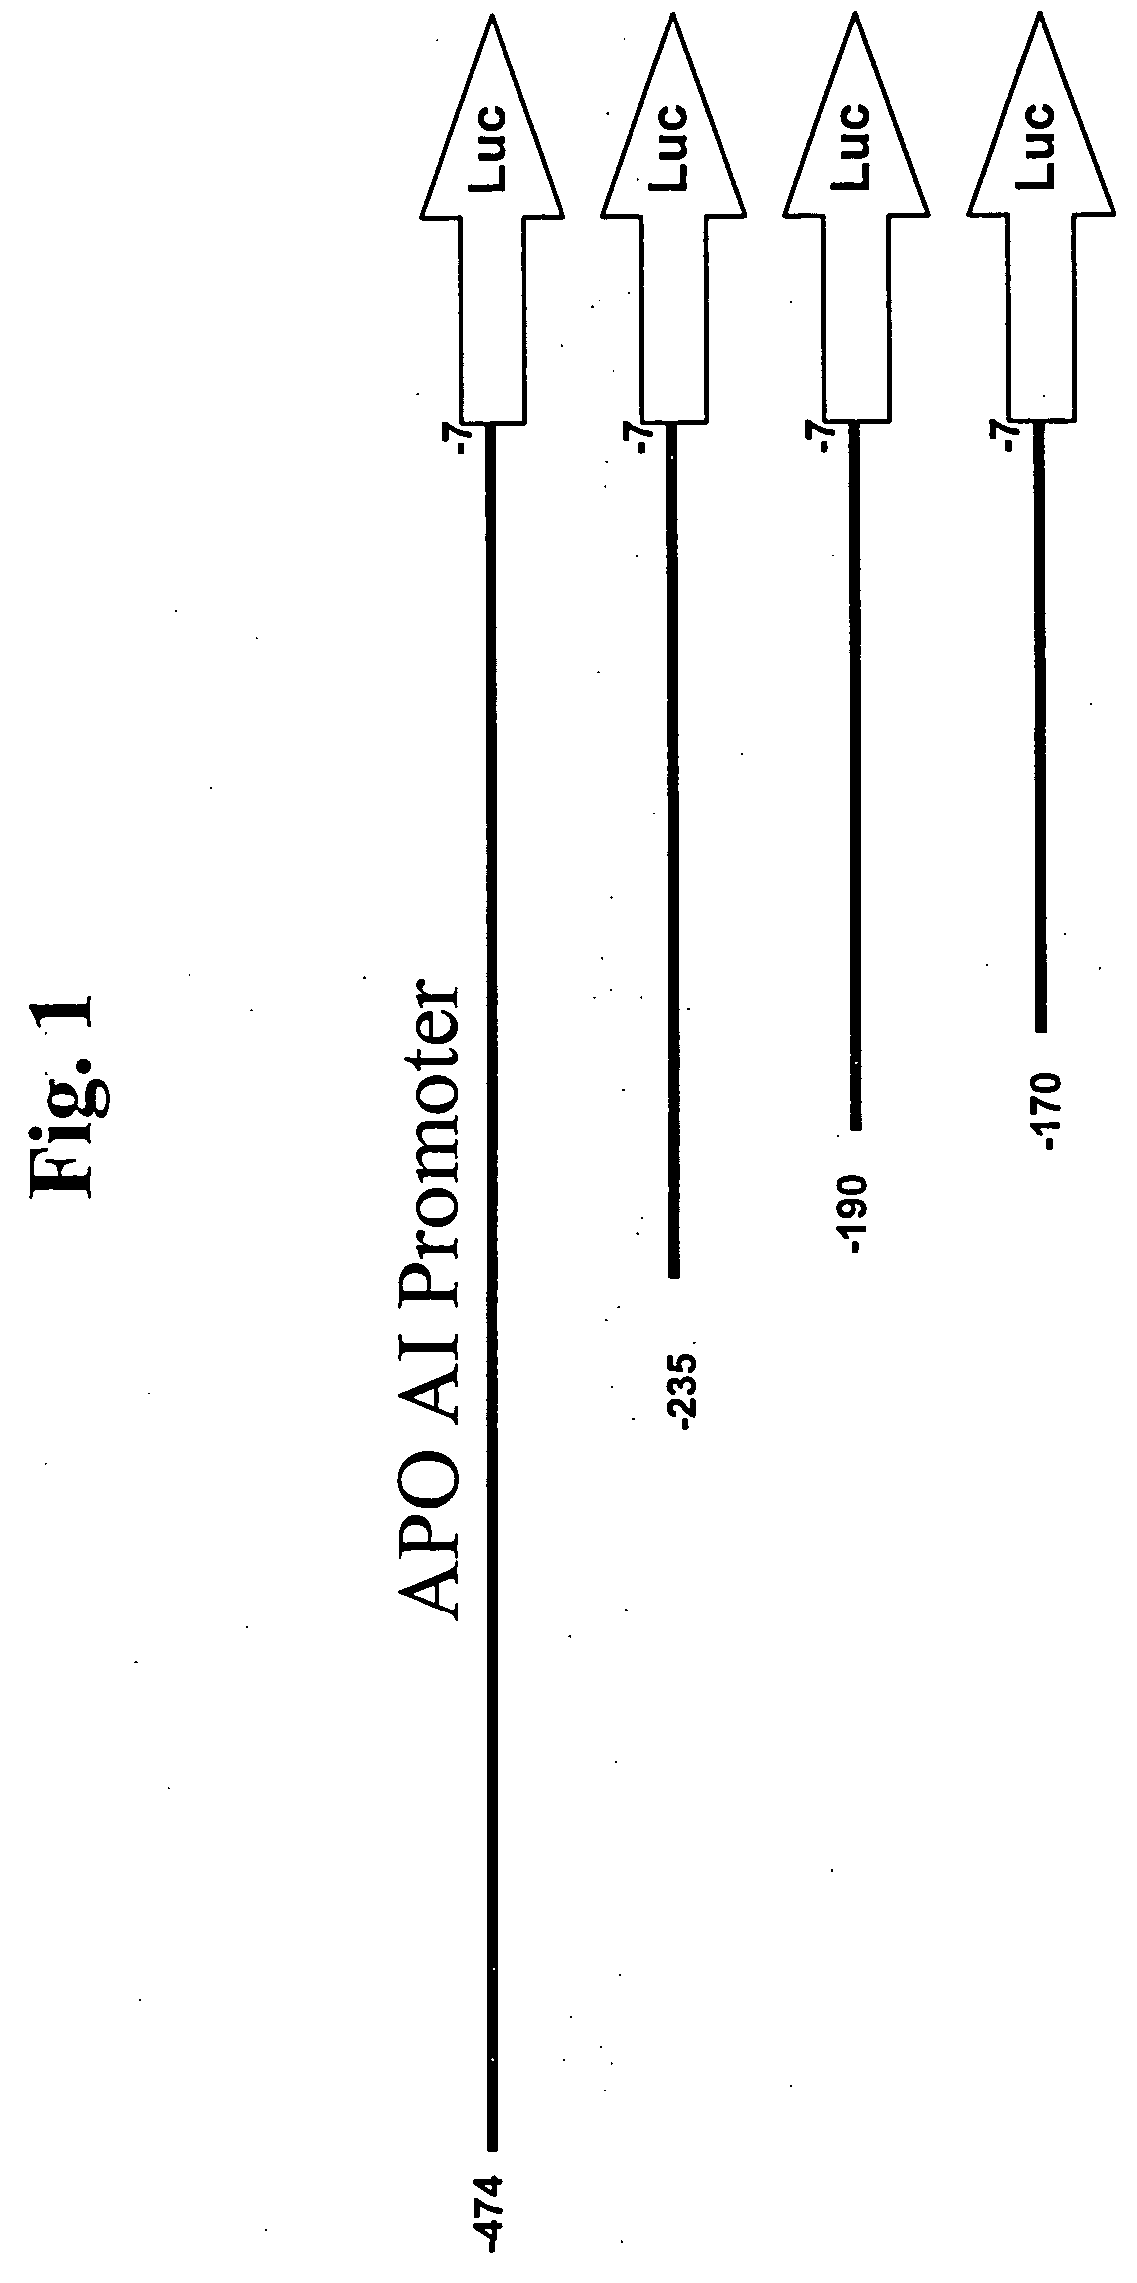 Use of resveratrol to regulate expression of apolipoprotein A1